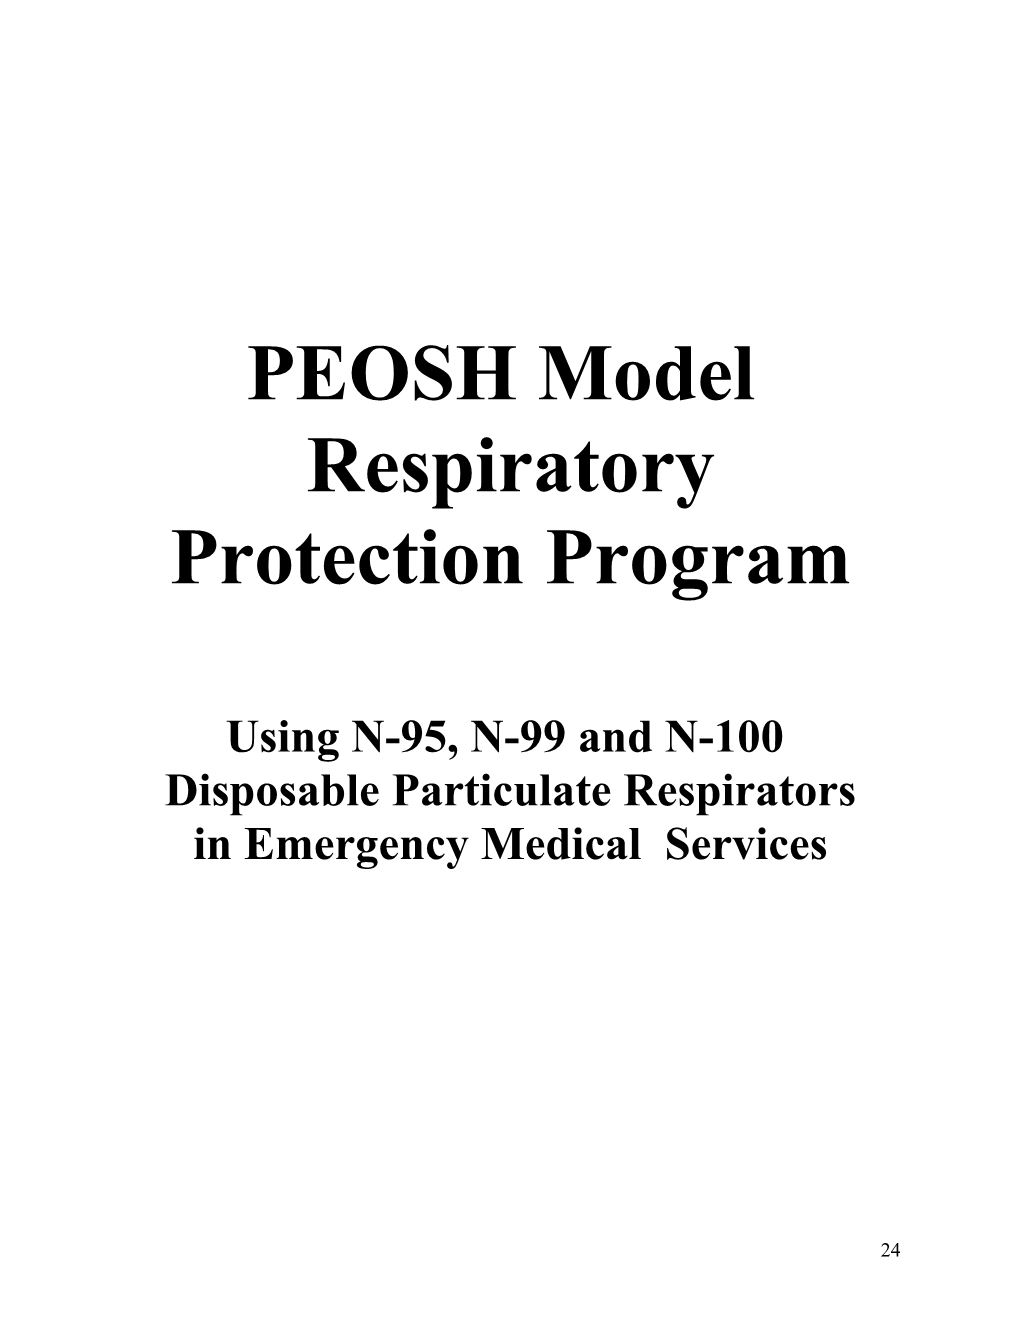 PEOSH Model Program for Use of N-95 Disposable Particulate Respirators in Emergency Medical